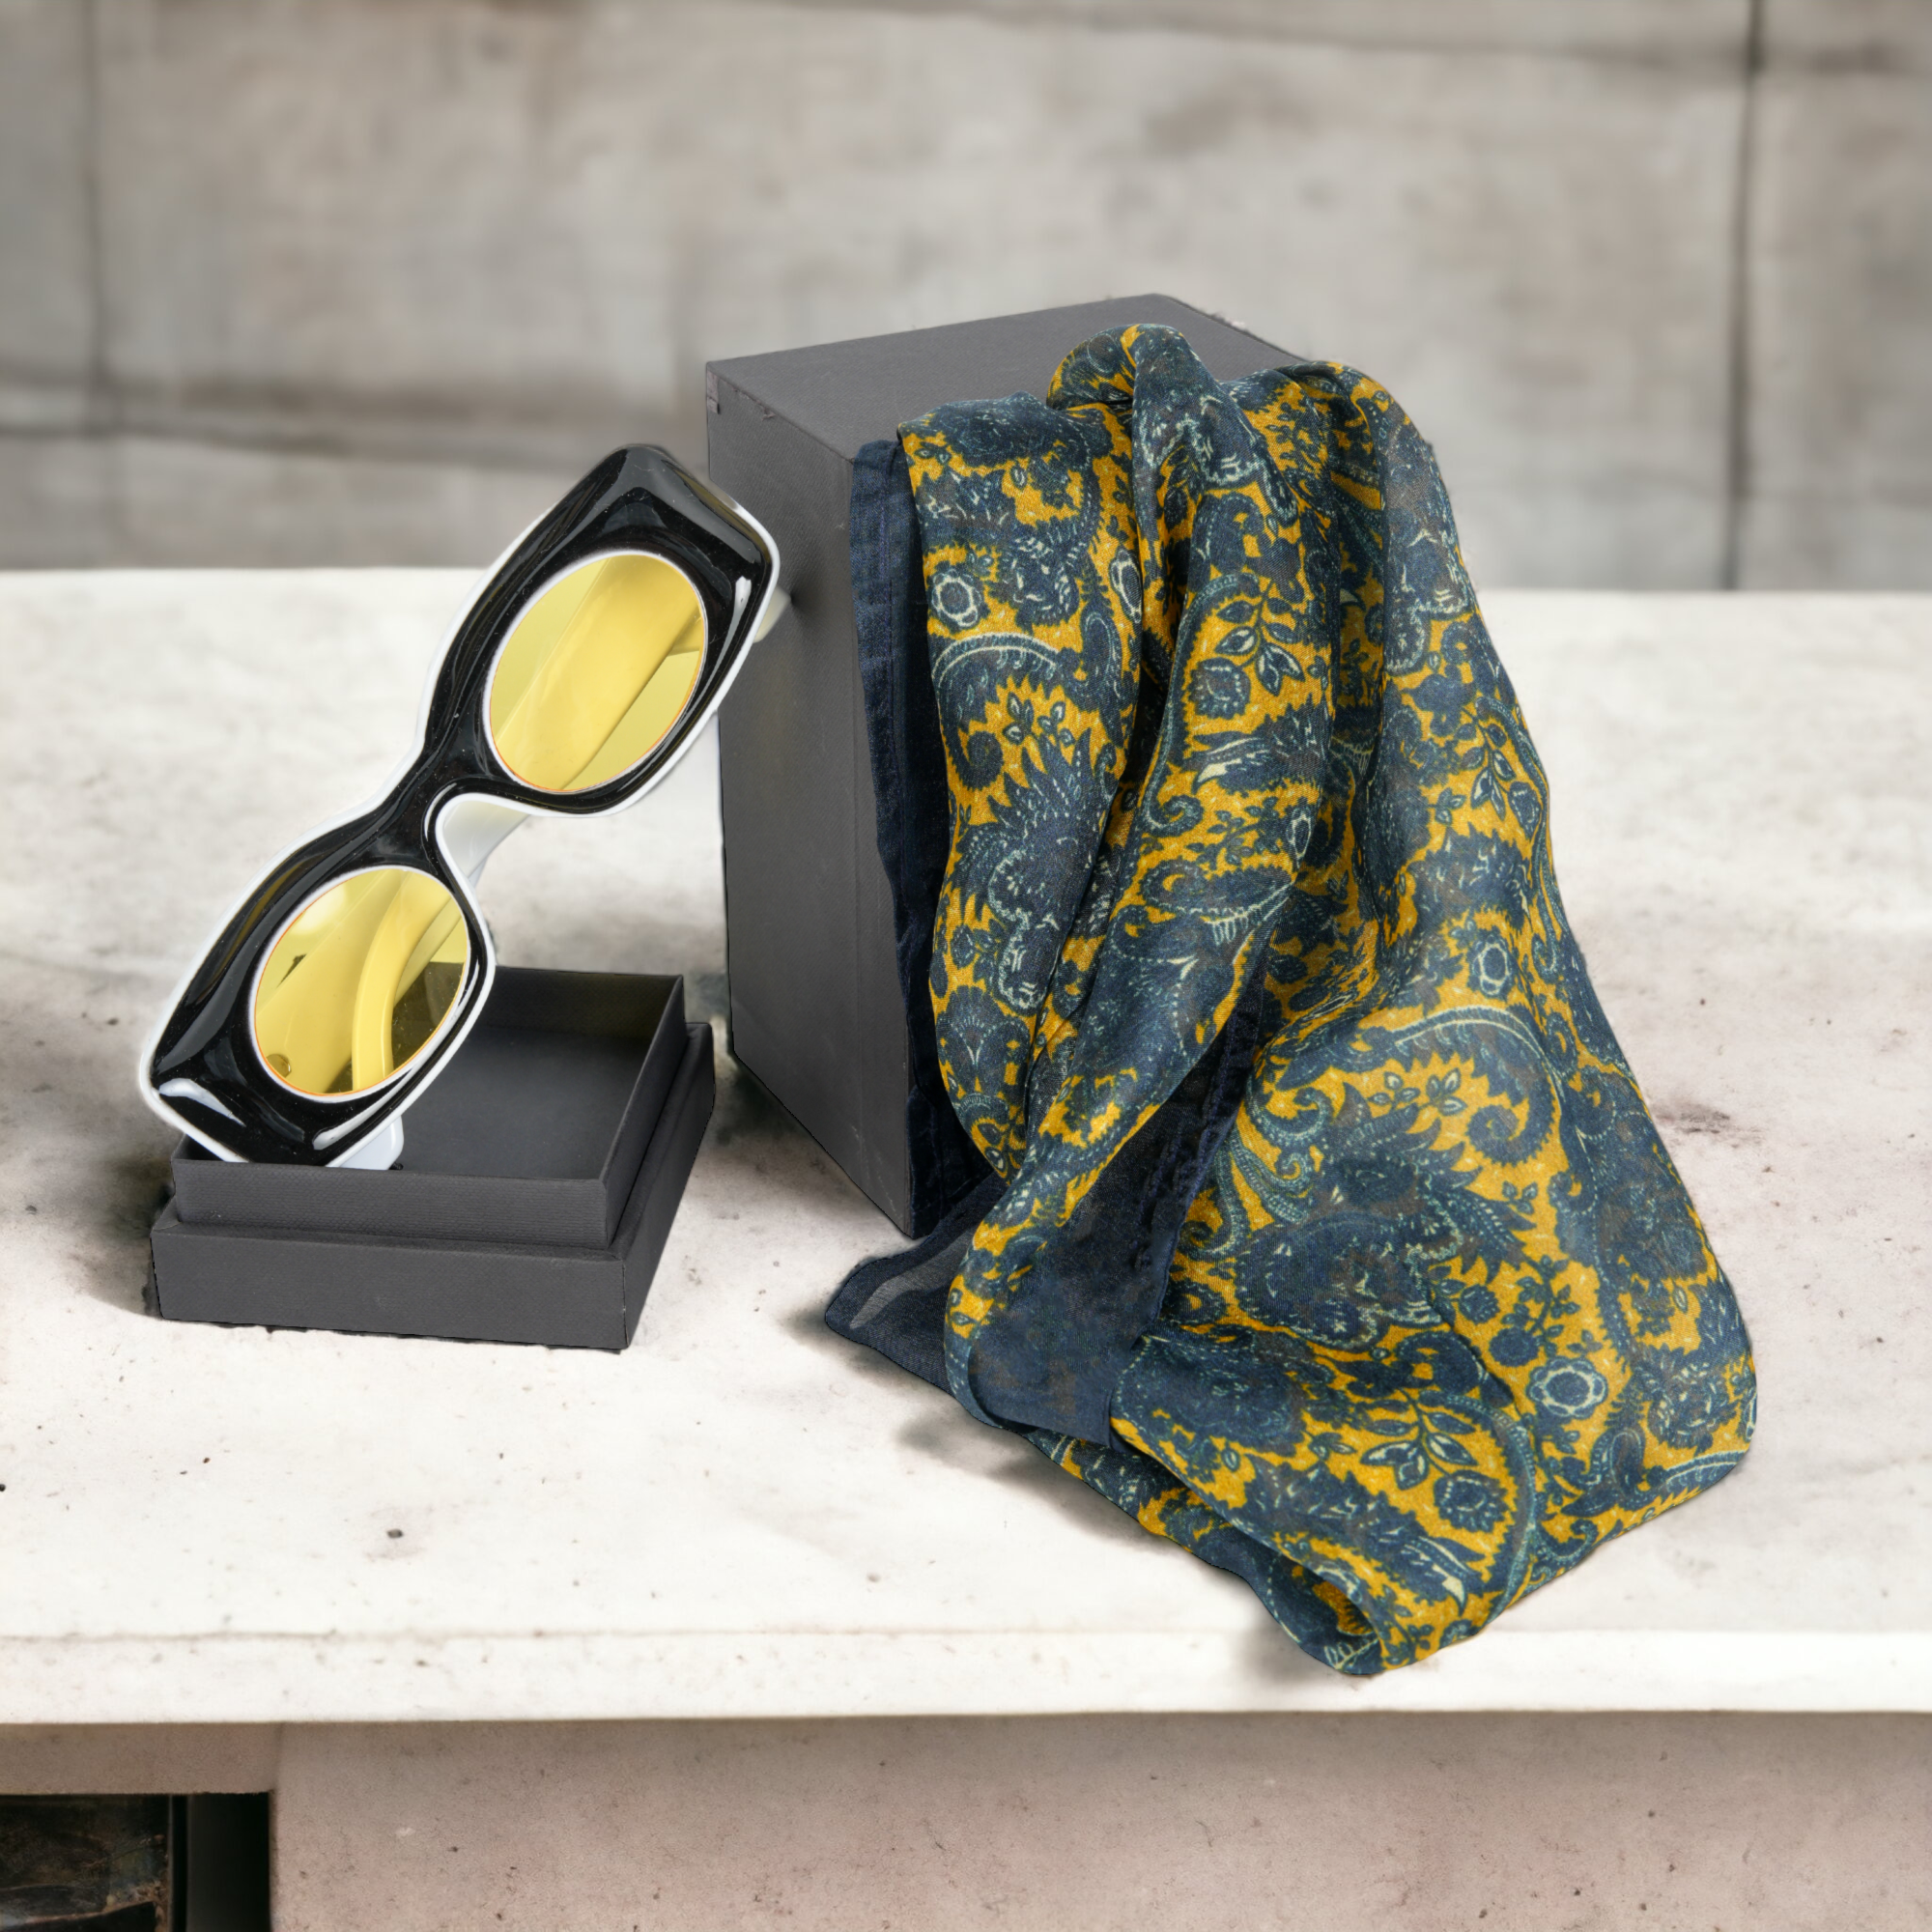 Chokore Special 2-in-1 Gift Set for Her (Silk Stole & Sunglasses)